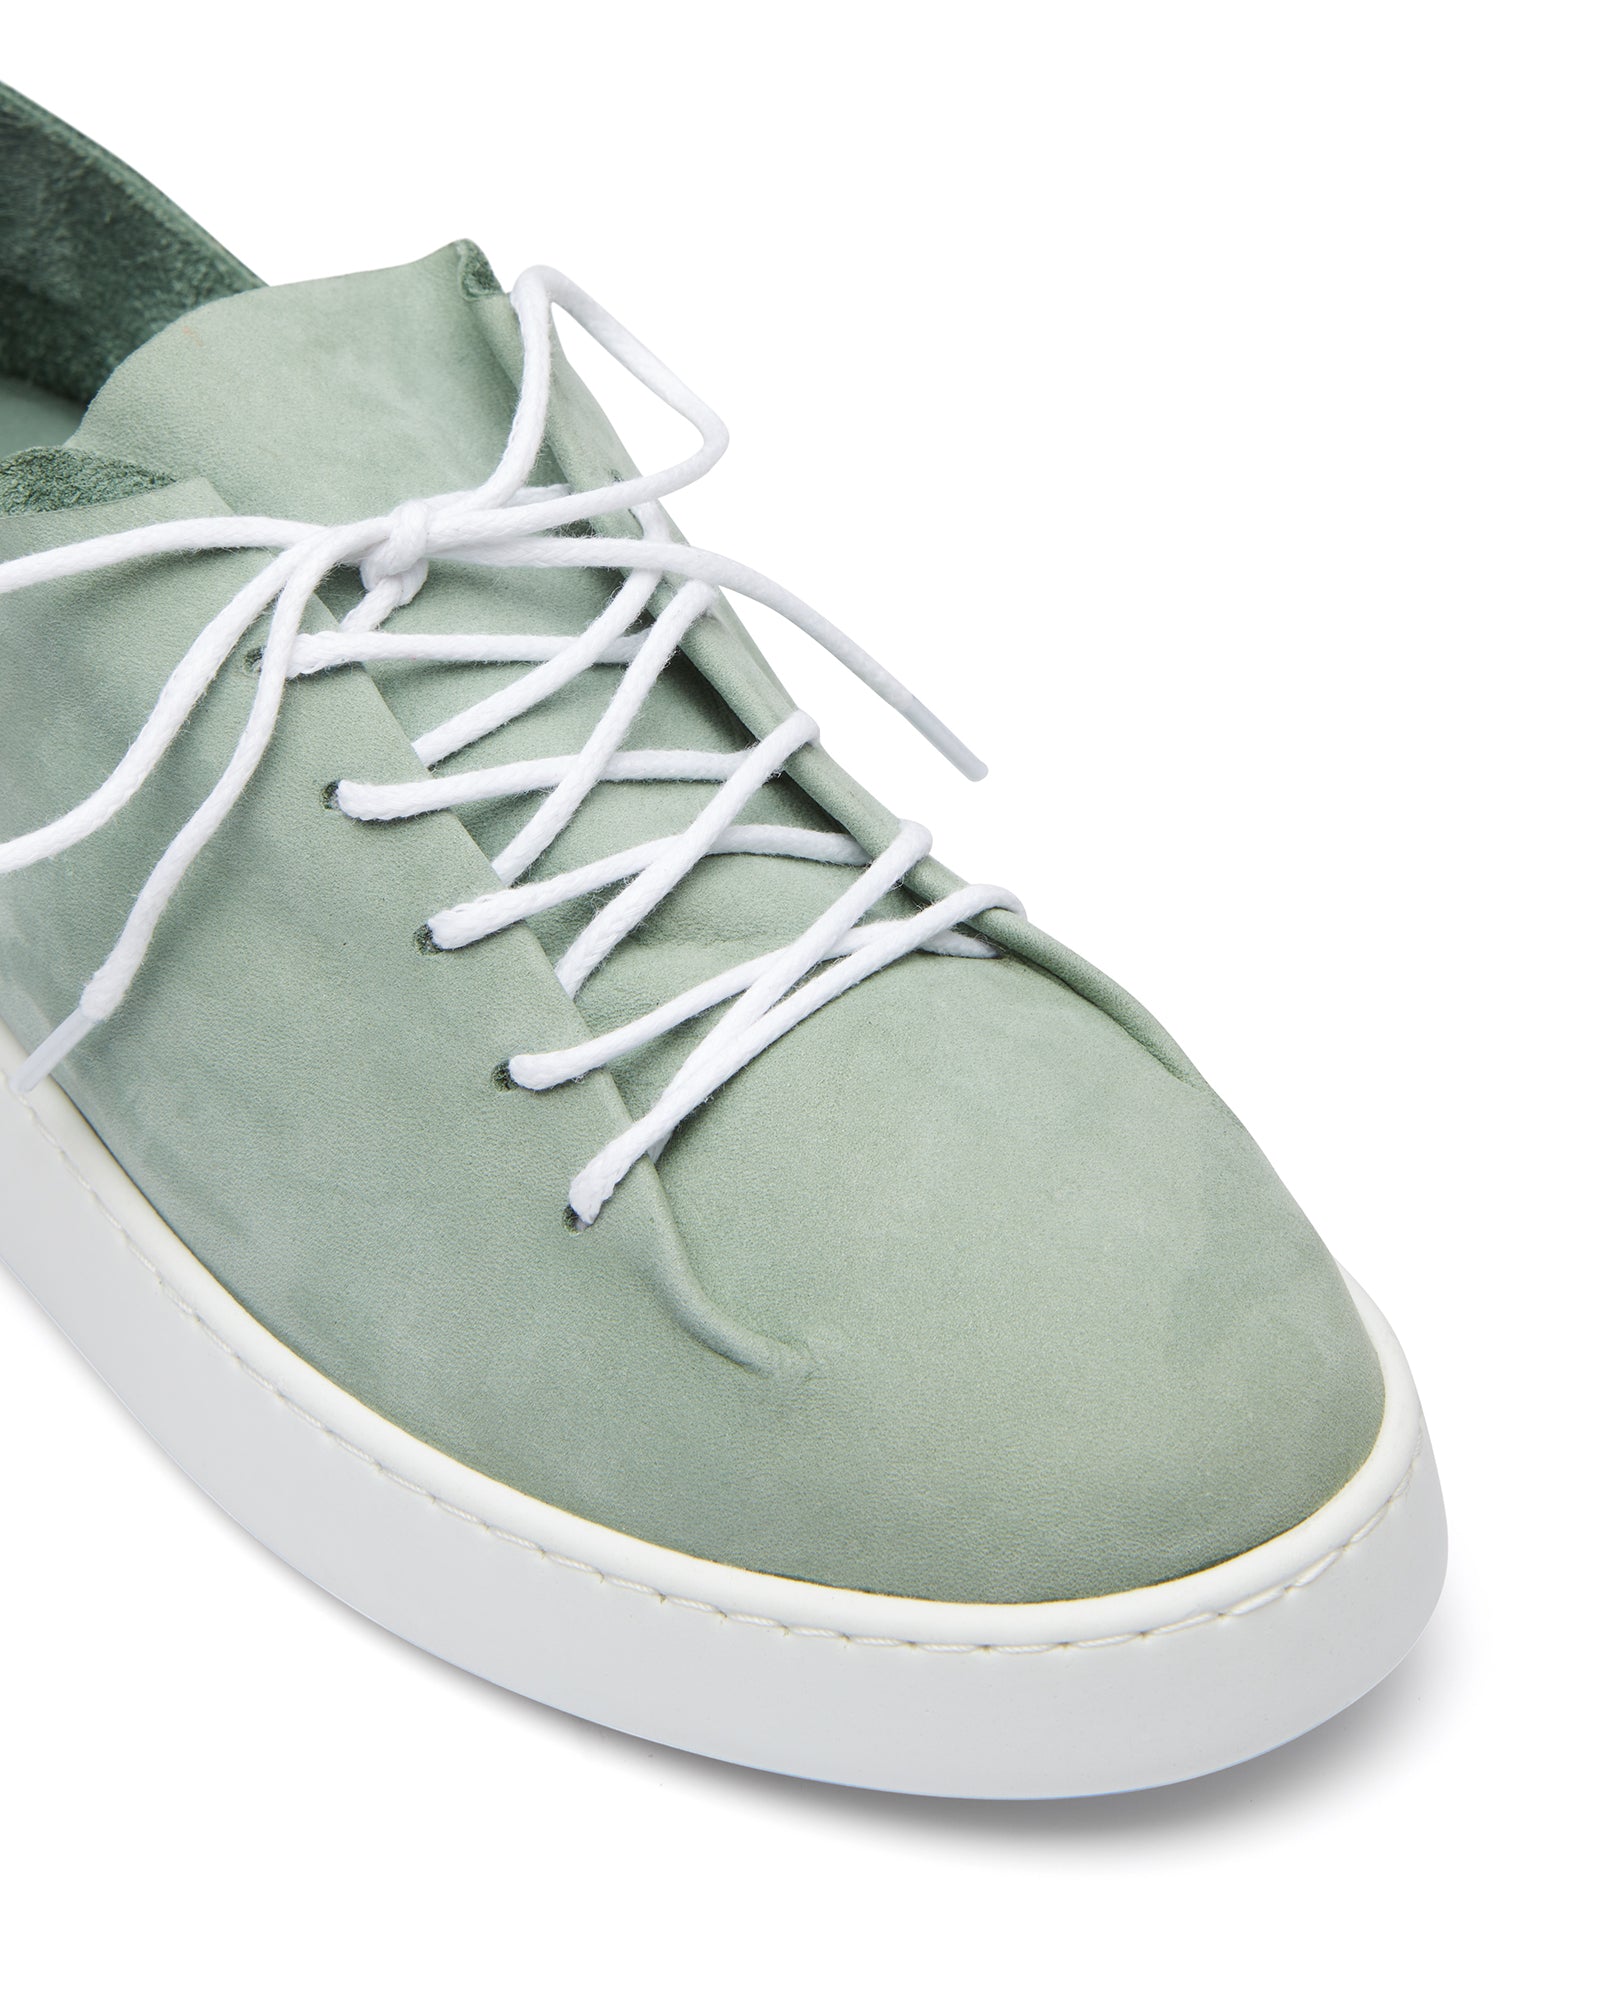 Just Because Shoes Angie Mint | Leather Sneaker | Lace Up | Platform